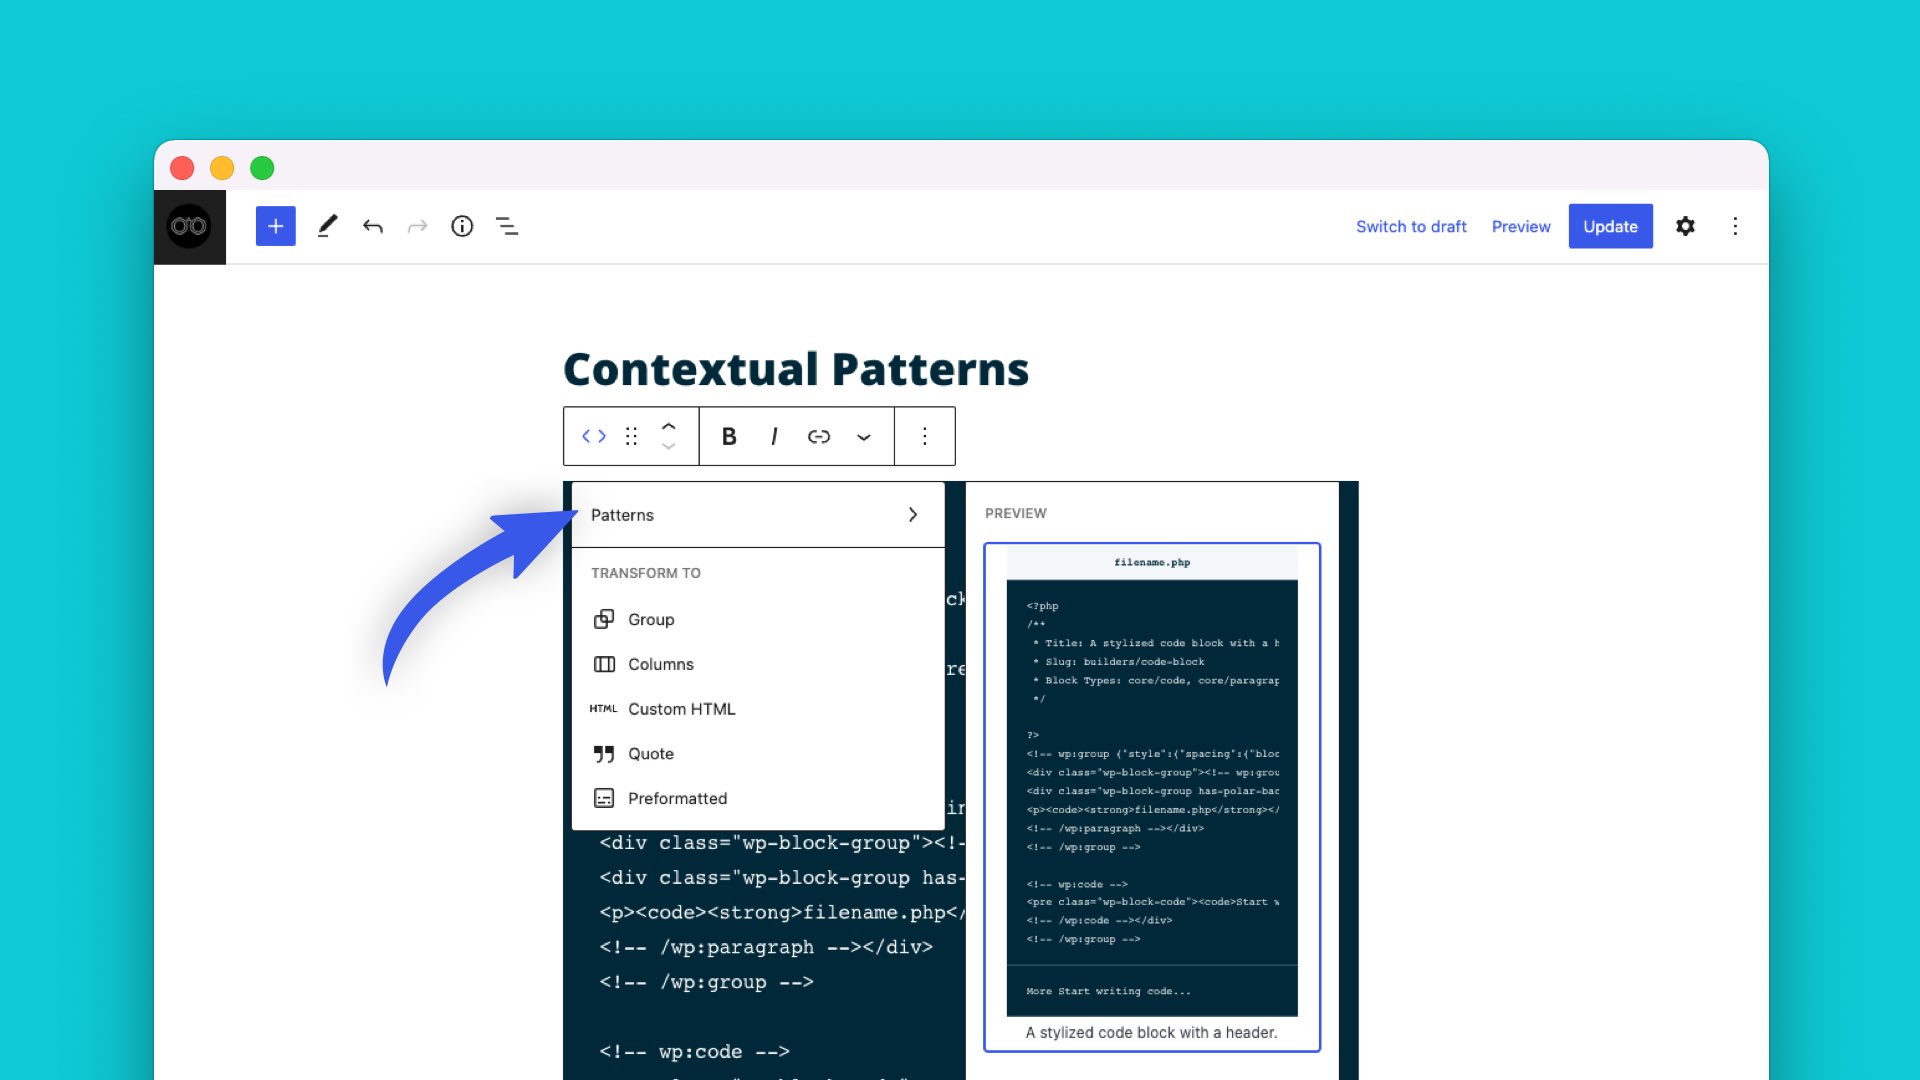 What are Contextual Patterns in WordPress?